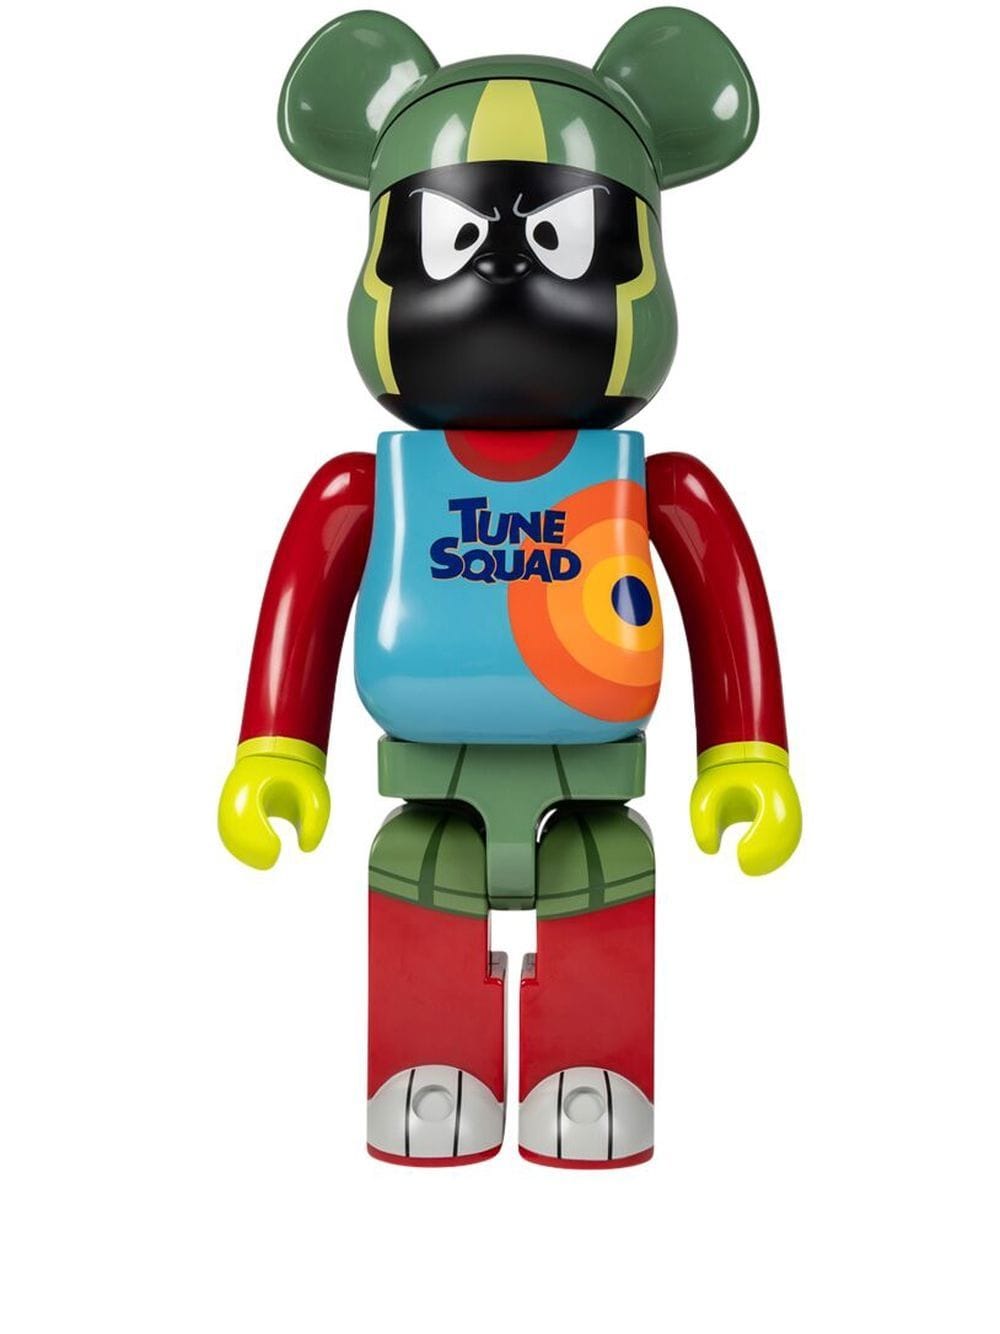 Medicom Toy X Space Jam: A New Legacy Marvin The Martian Be@rbrick 1000% Figure In Green